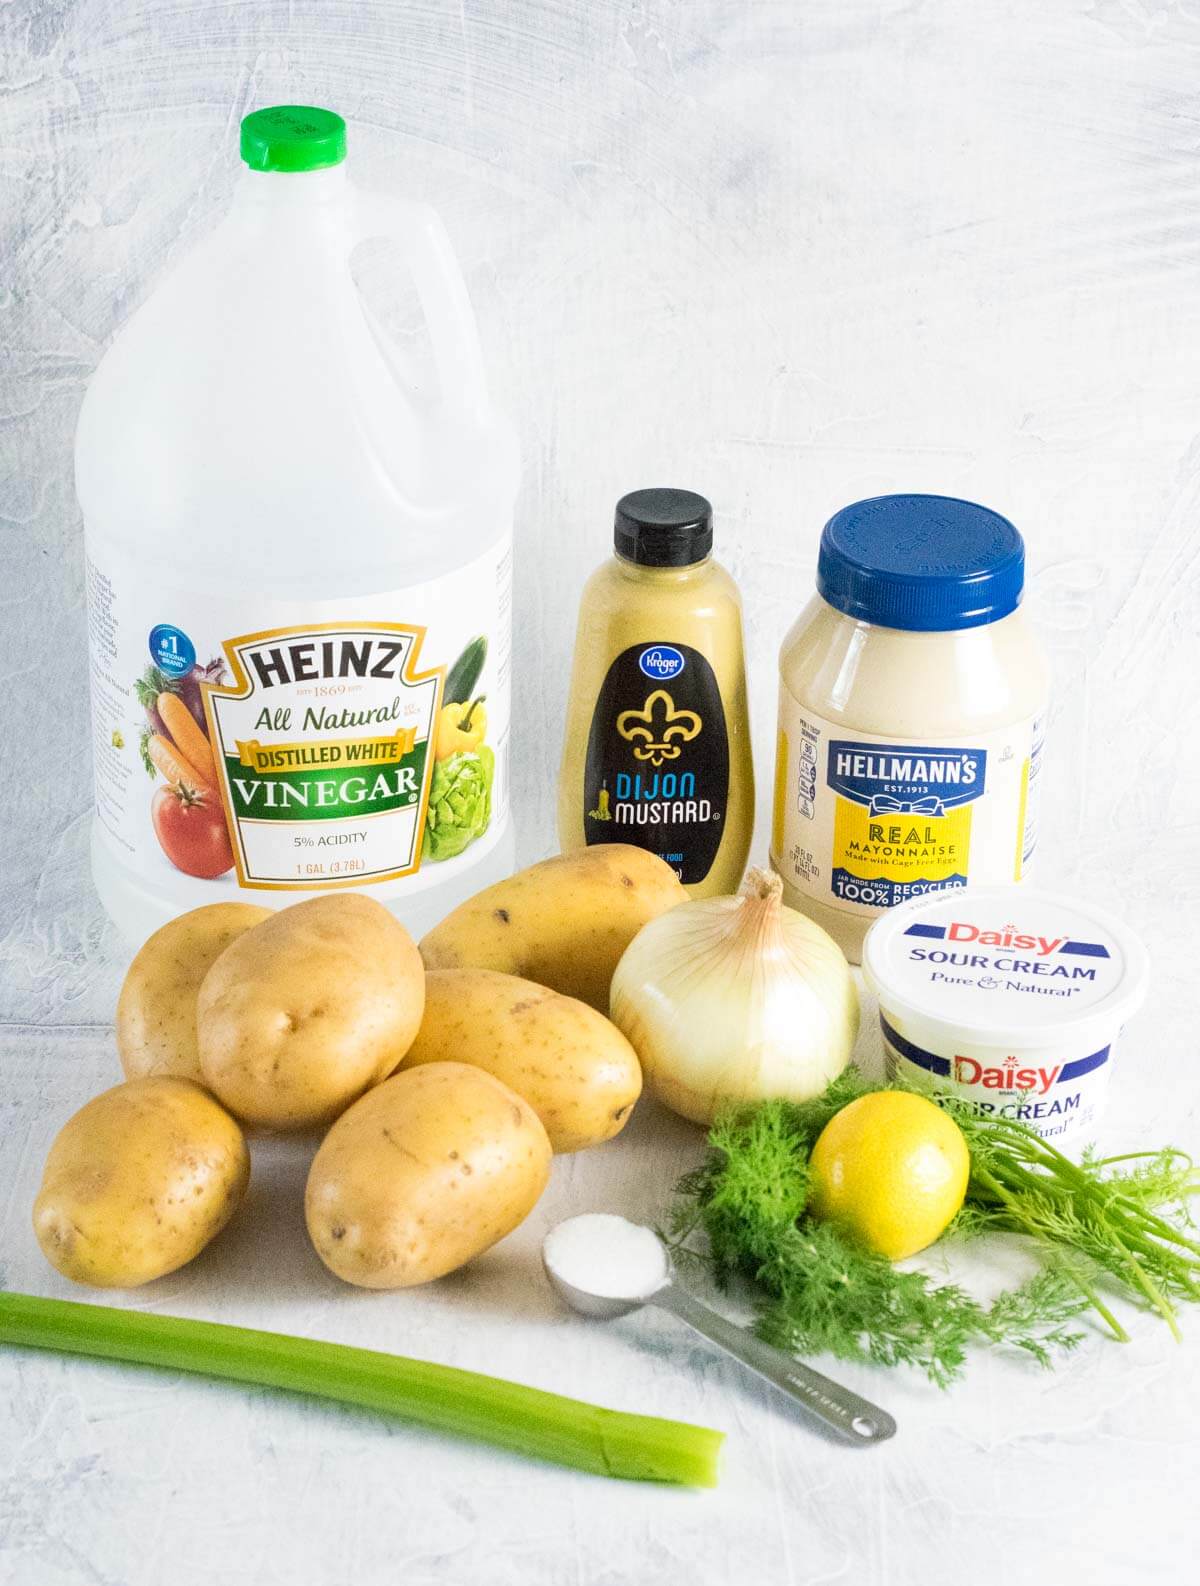 Showing ingredients for potato salad with dill.